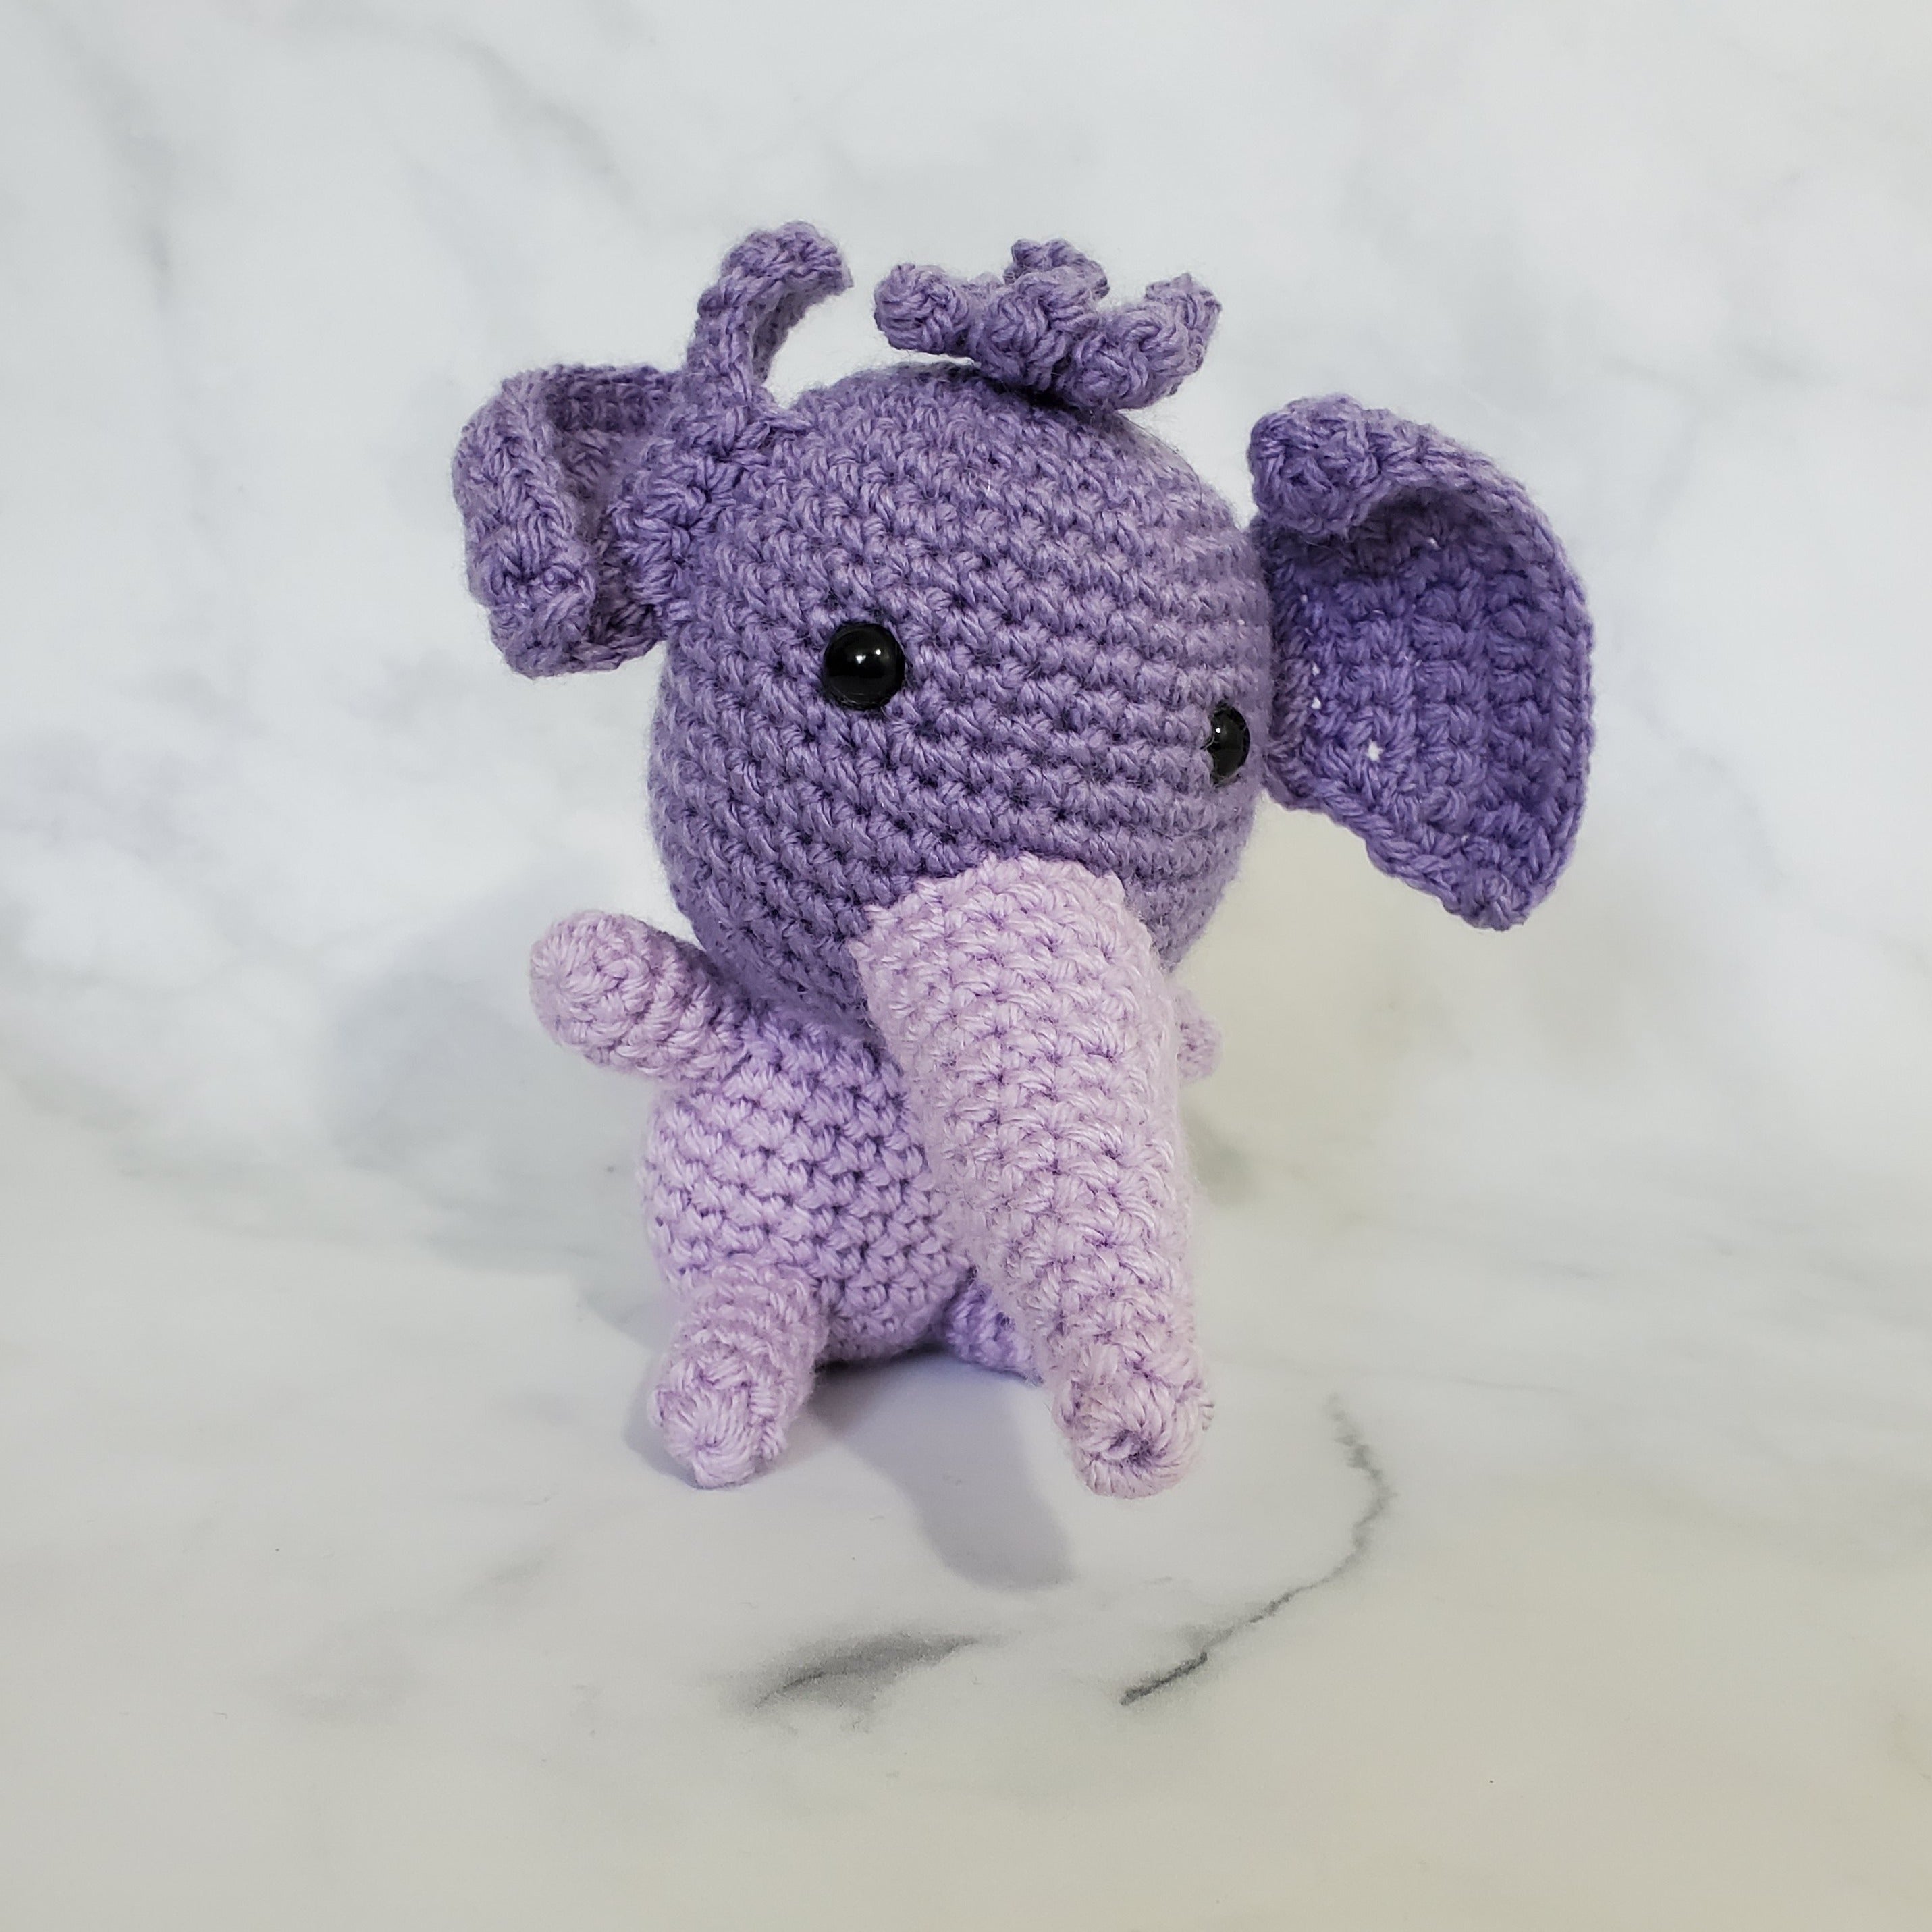 Elephant Plush Toy in Purple - 5 Inches